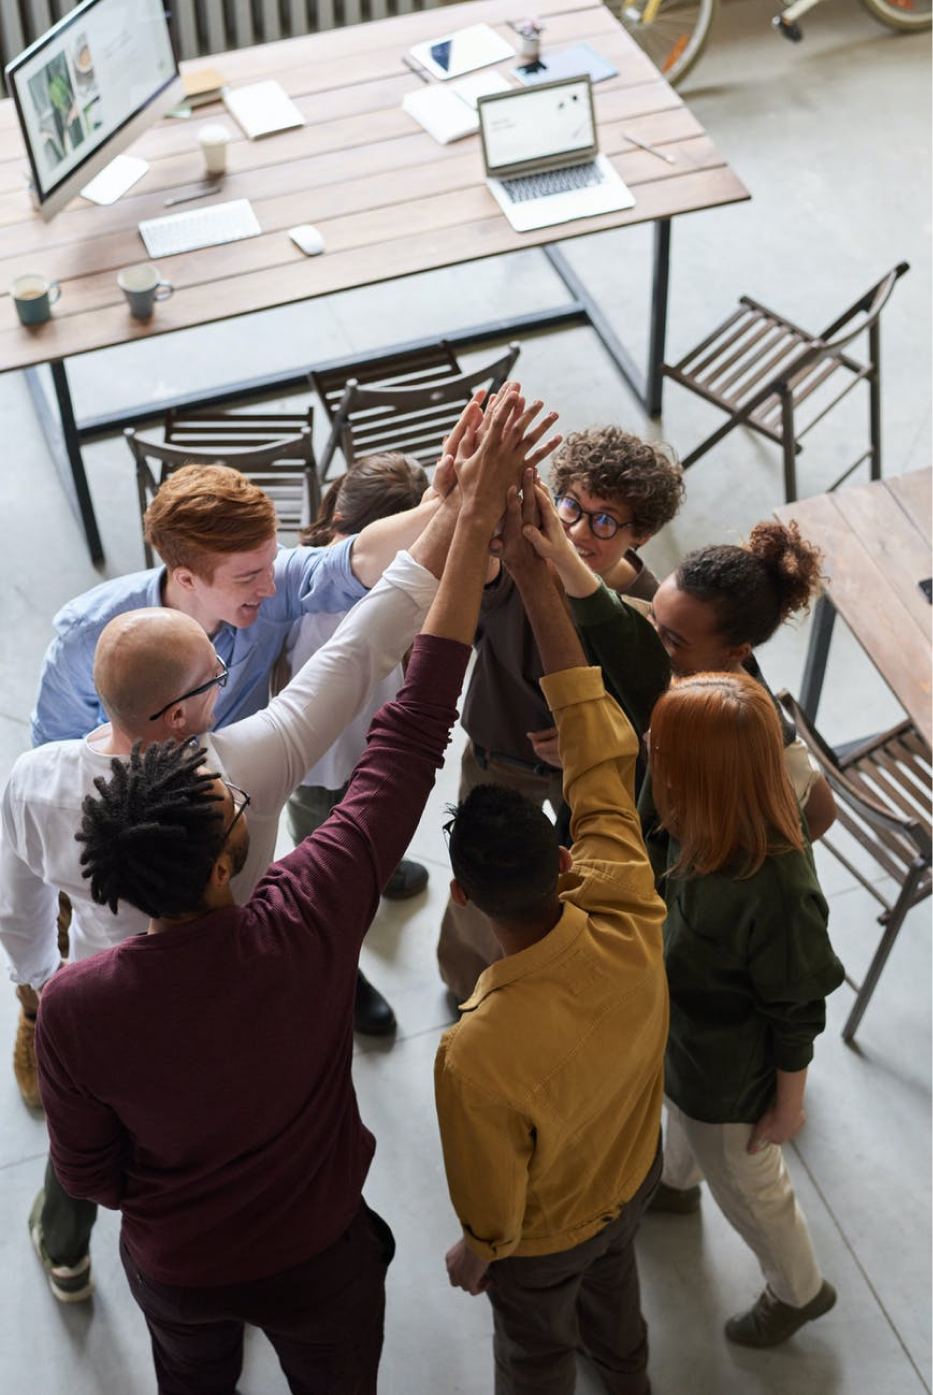 A group of people high fiving in a circle.